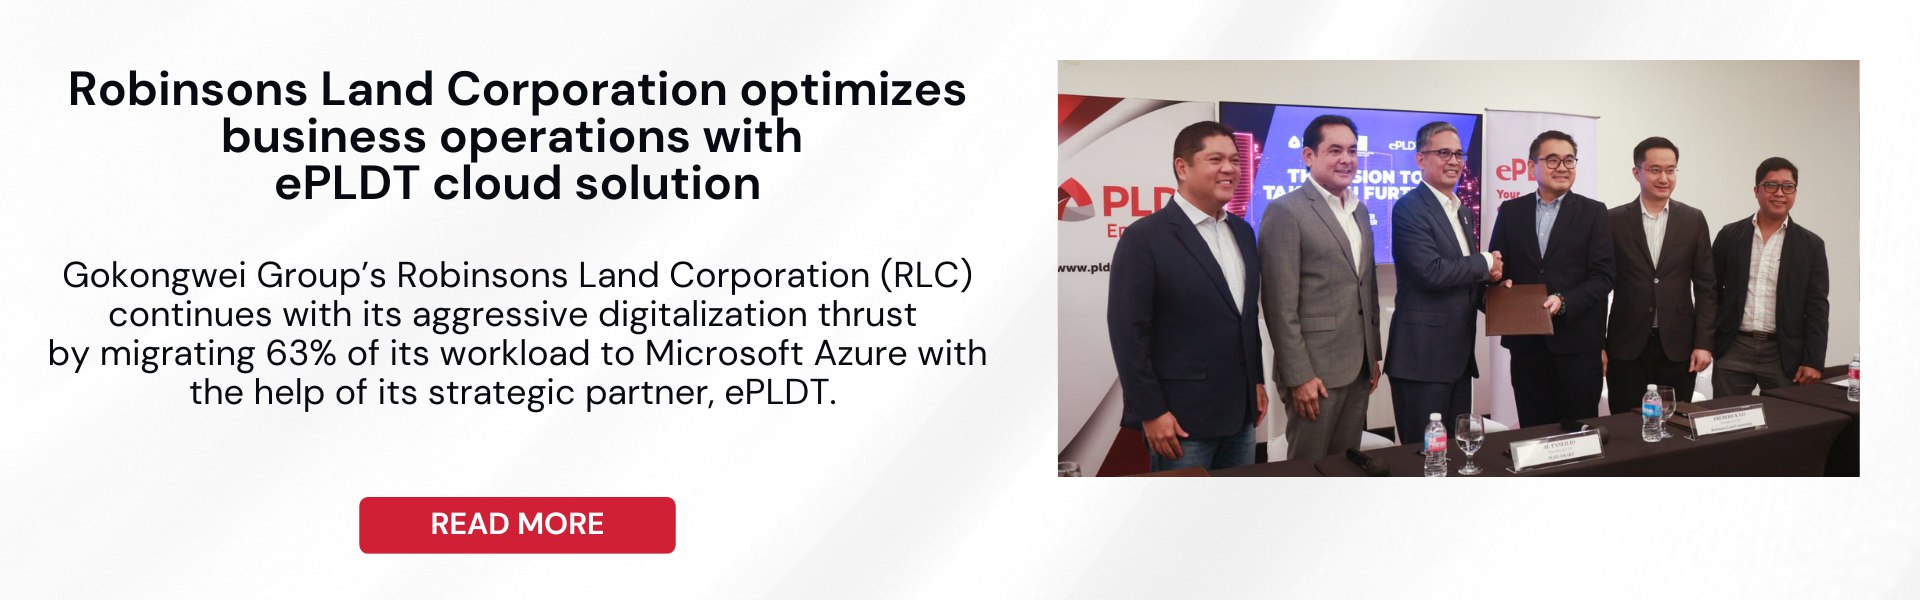 robinsons land corporation optimizes business operations with epldt solutions